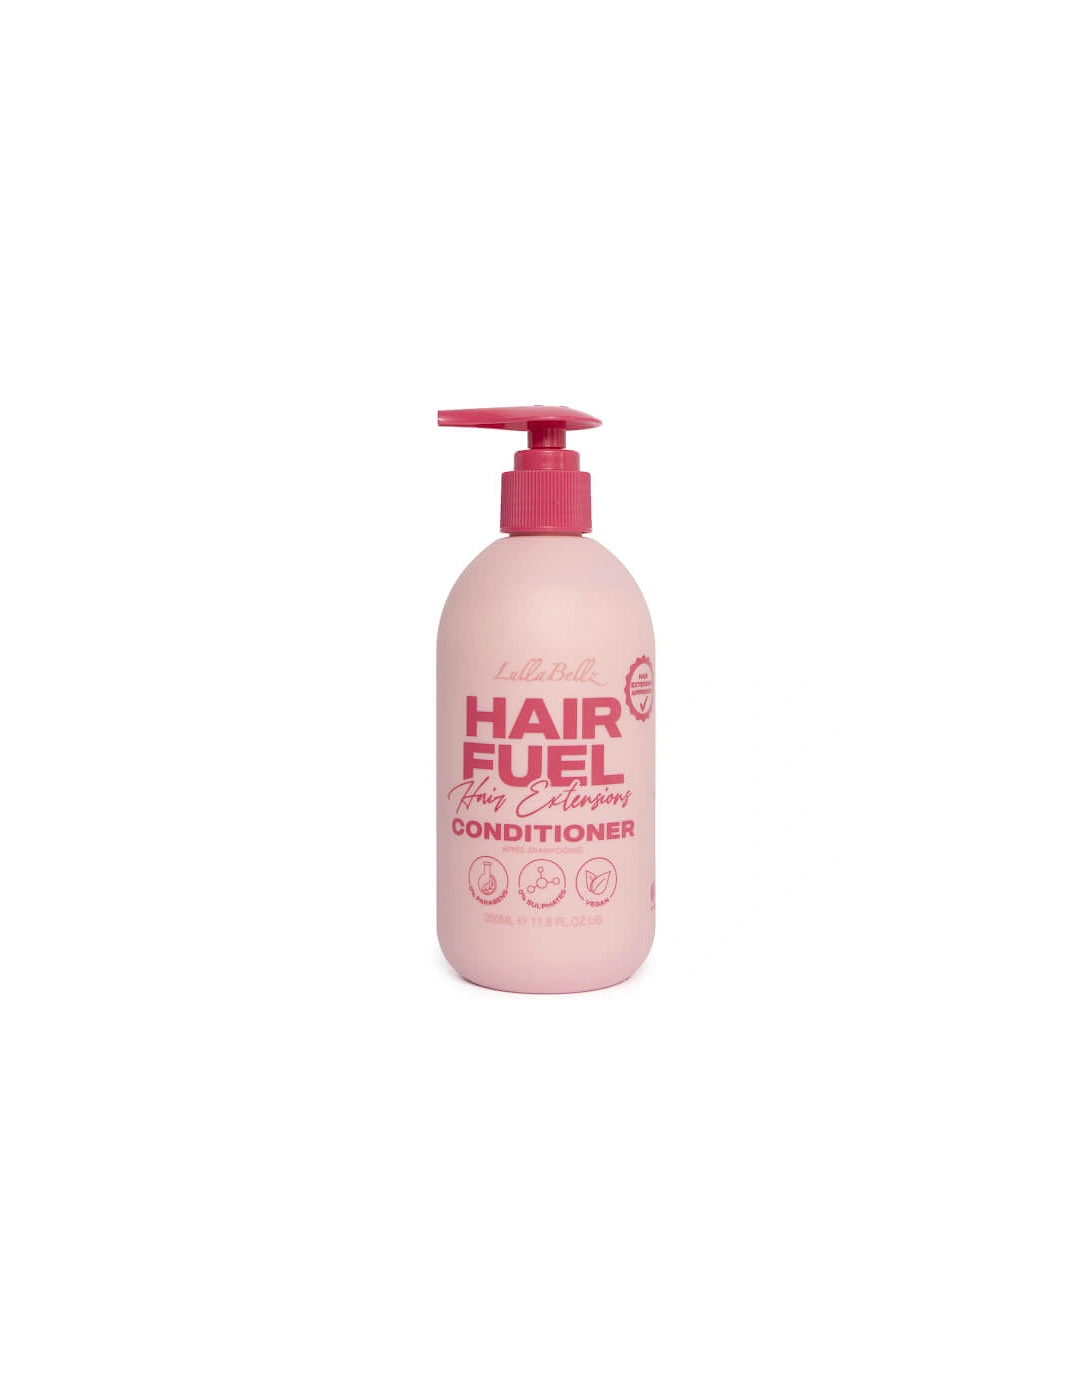 Hair Fuel Hair Extension Conditioner 350ml, 2 of 1